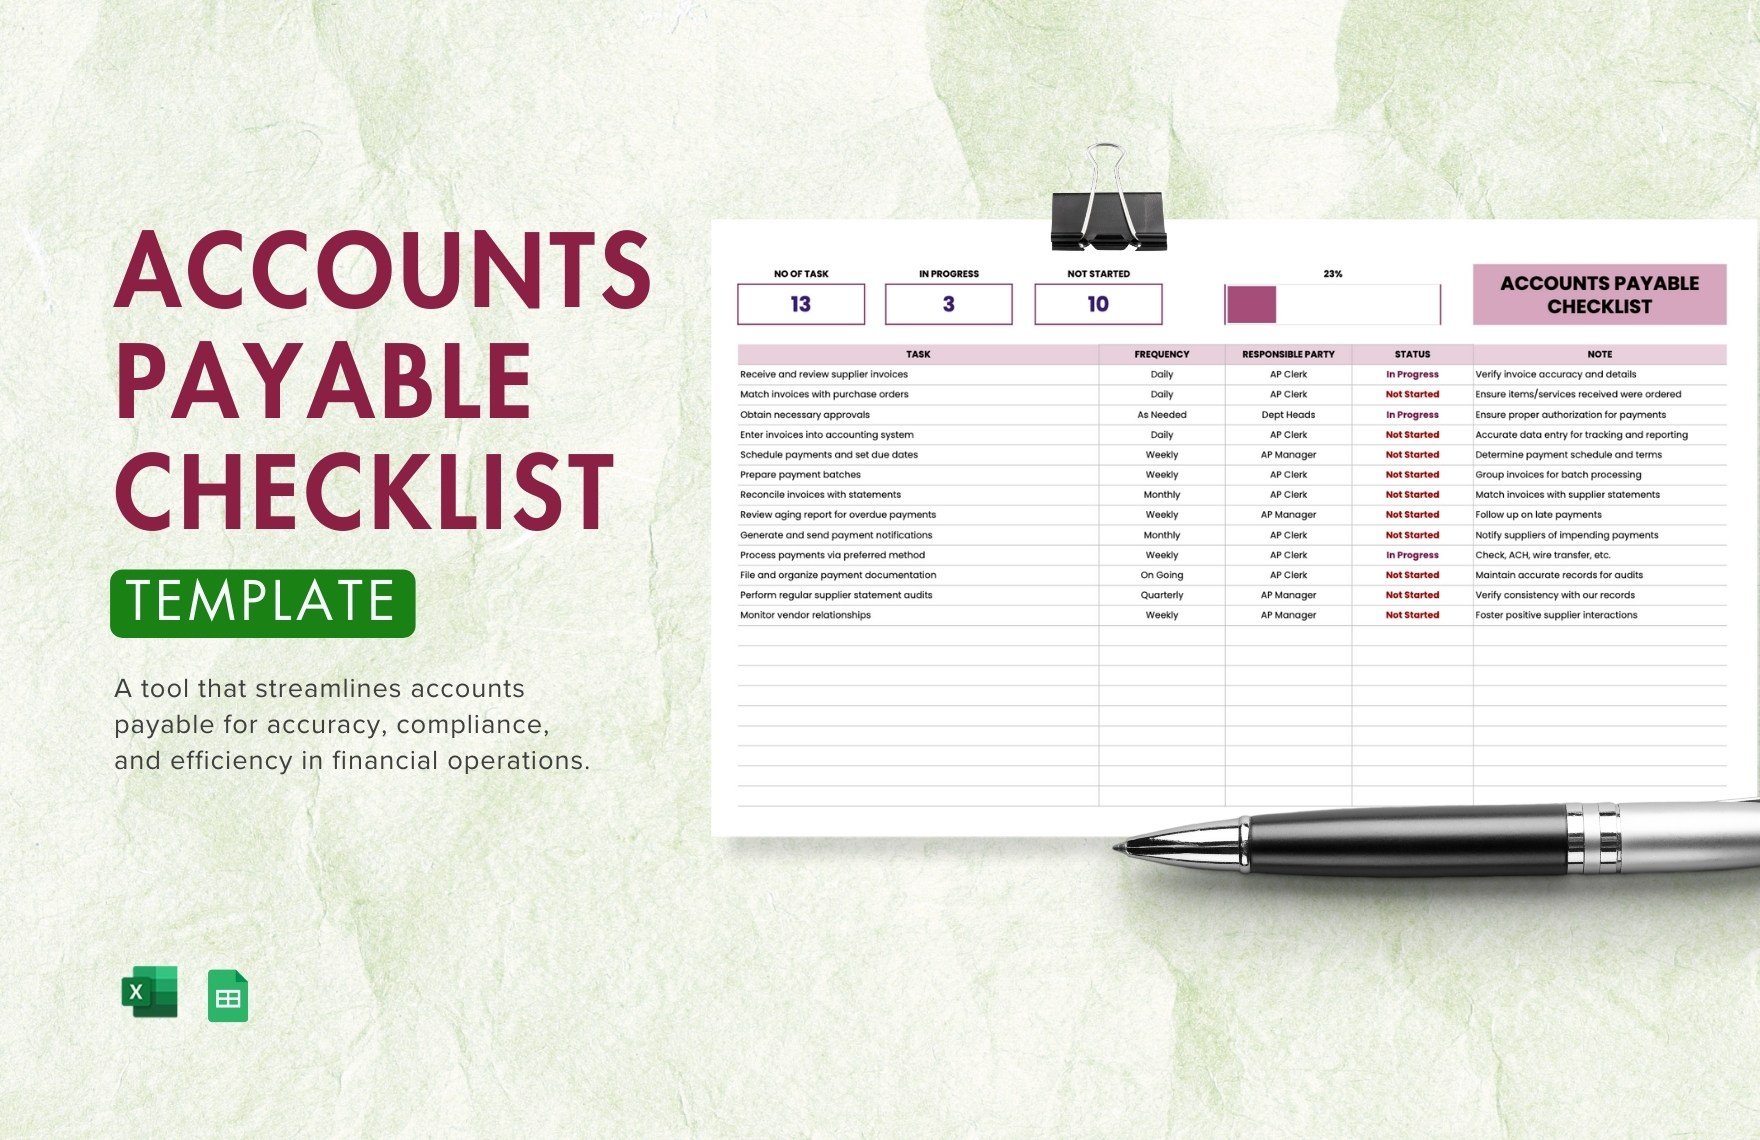 Accounts Payable Checklist Template in Excel, Google Sheets